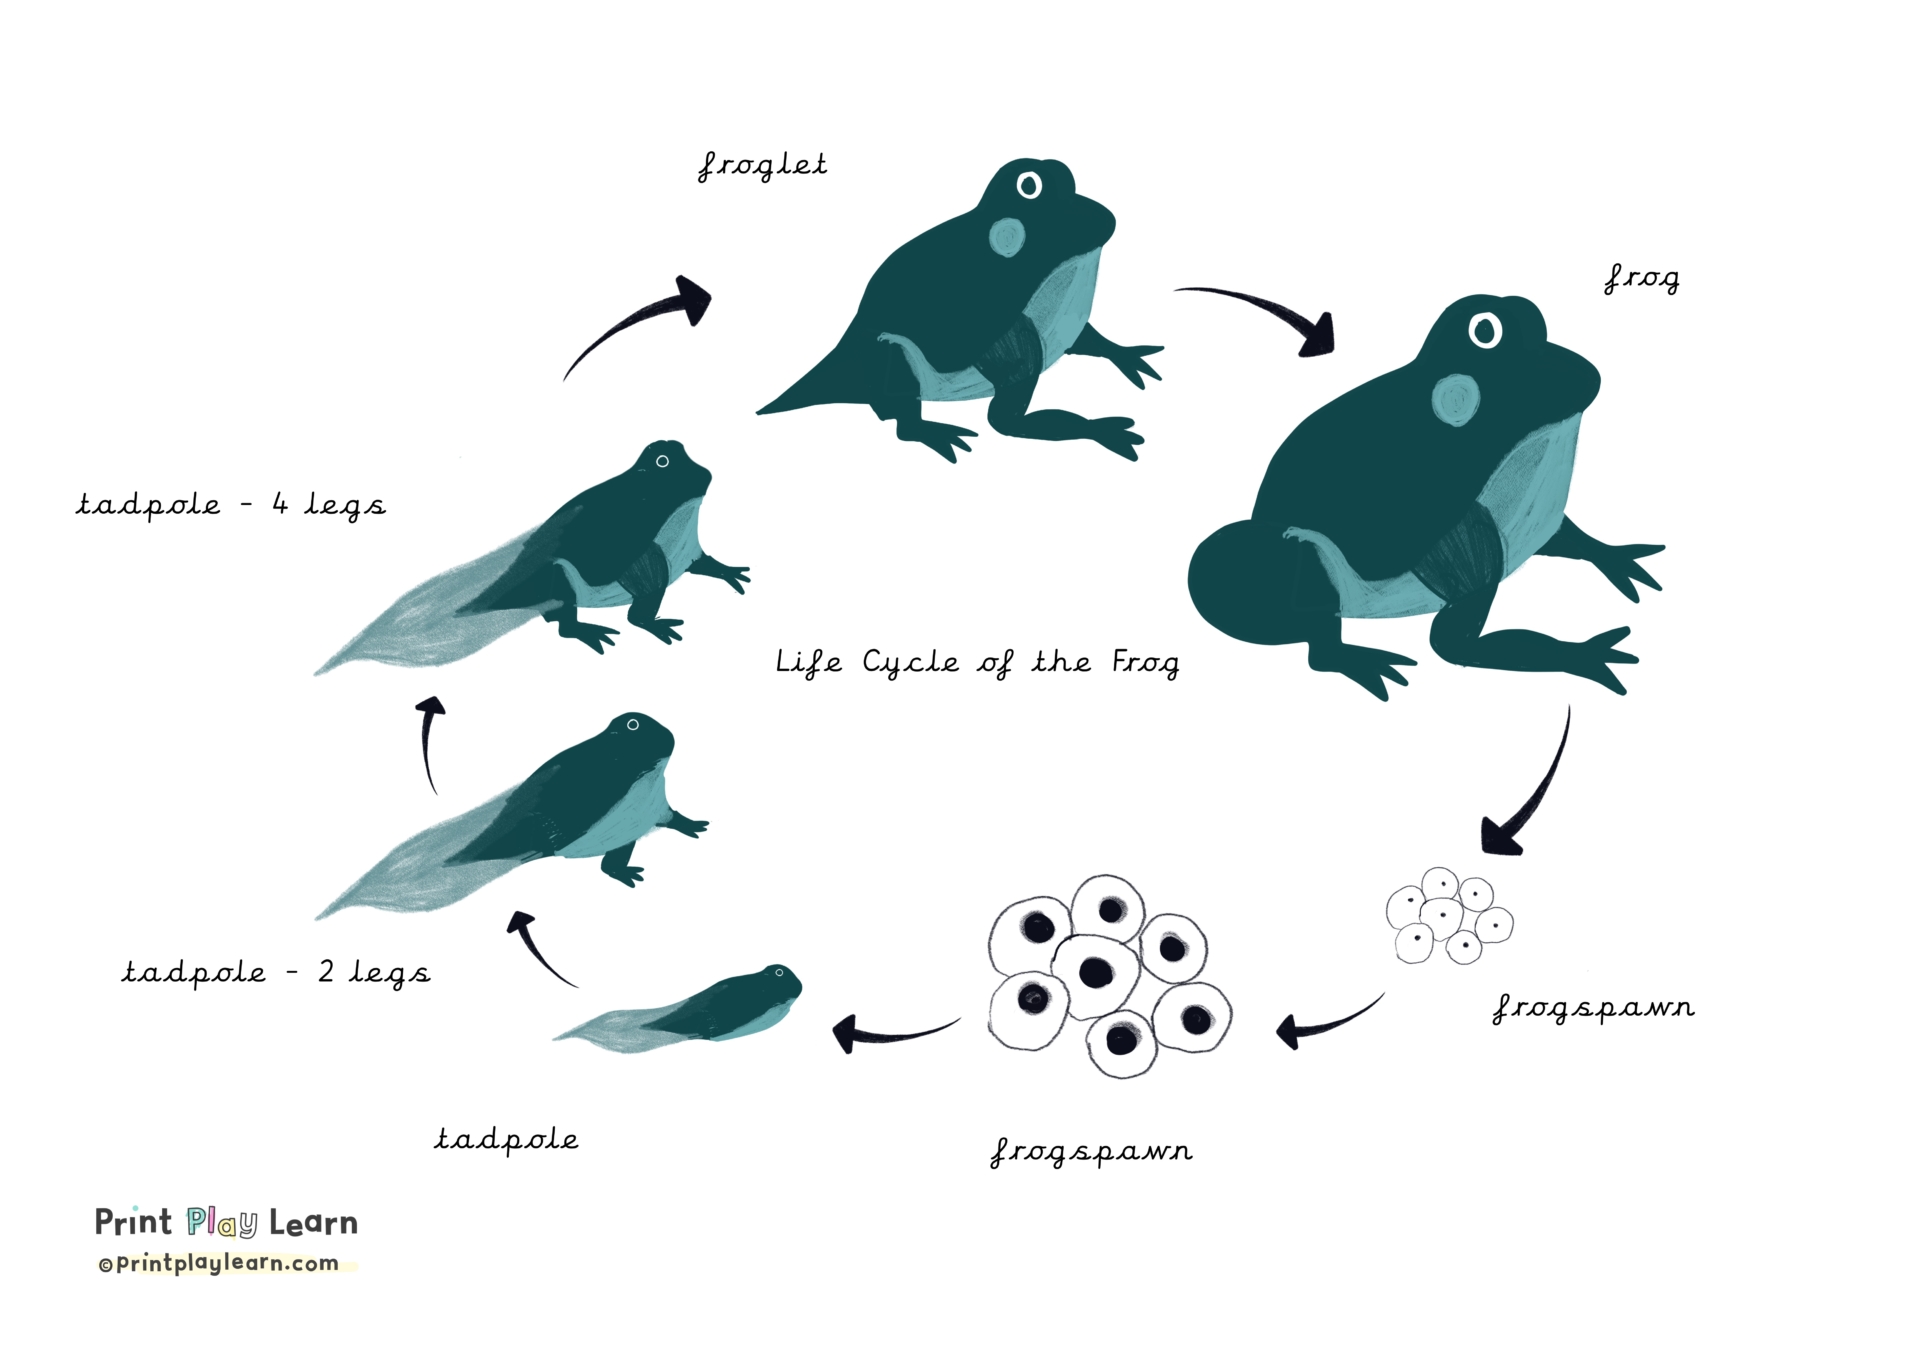 life-cycle-of-a-frog-printable-teaching-resources-print-play-learn